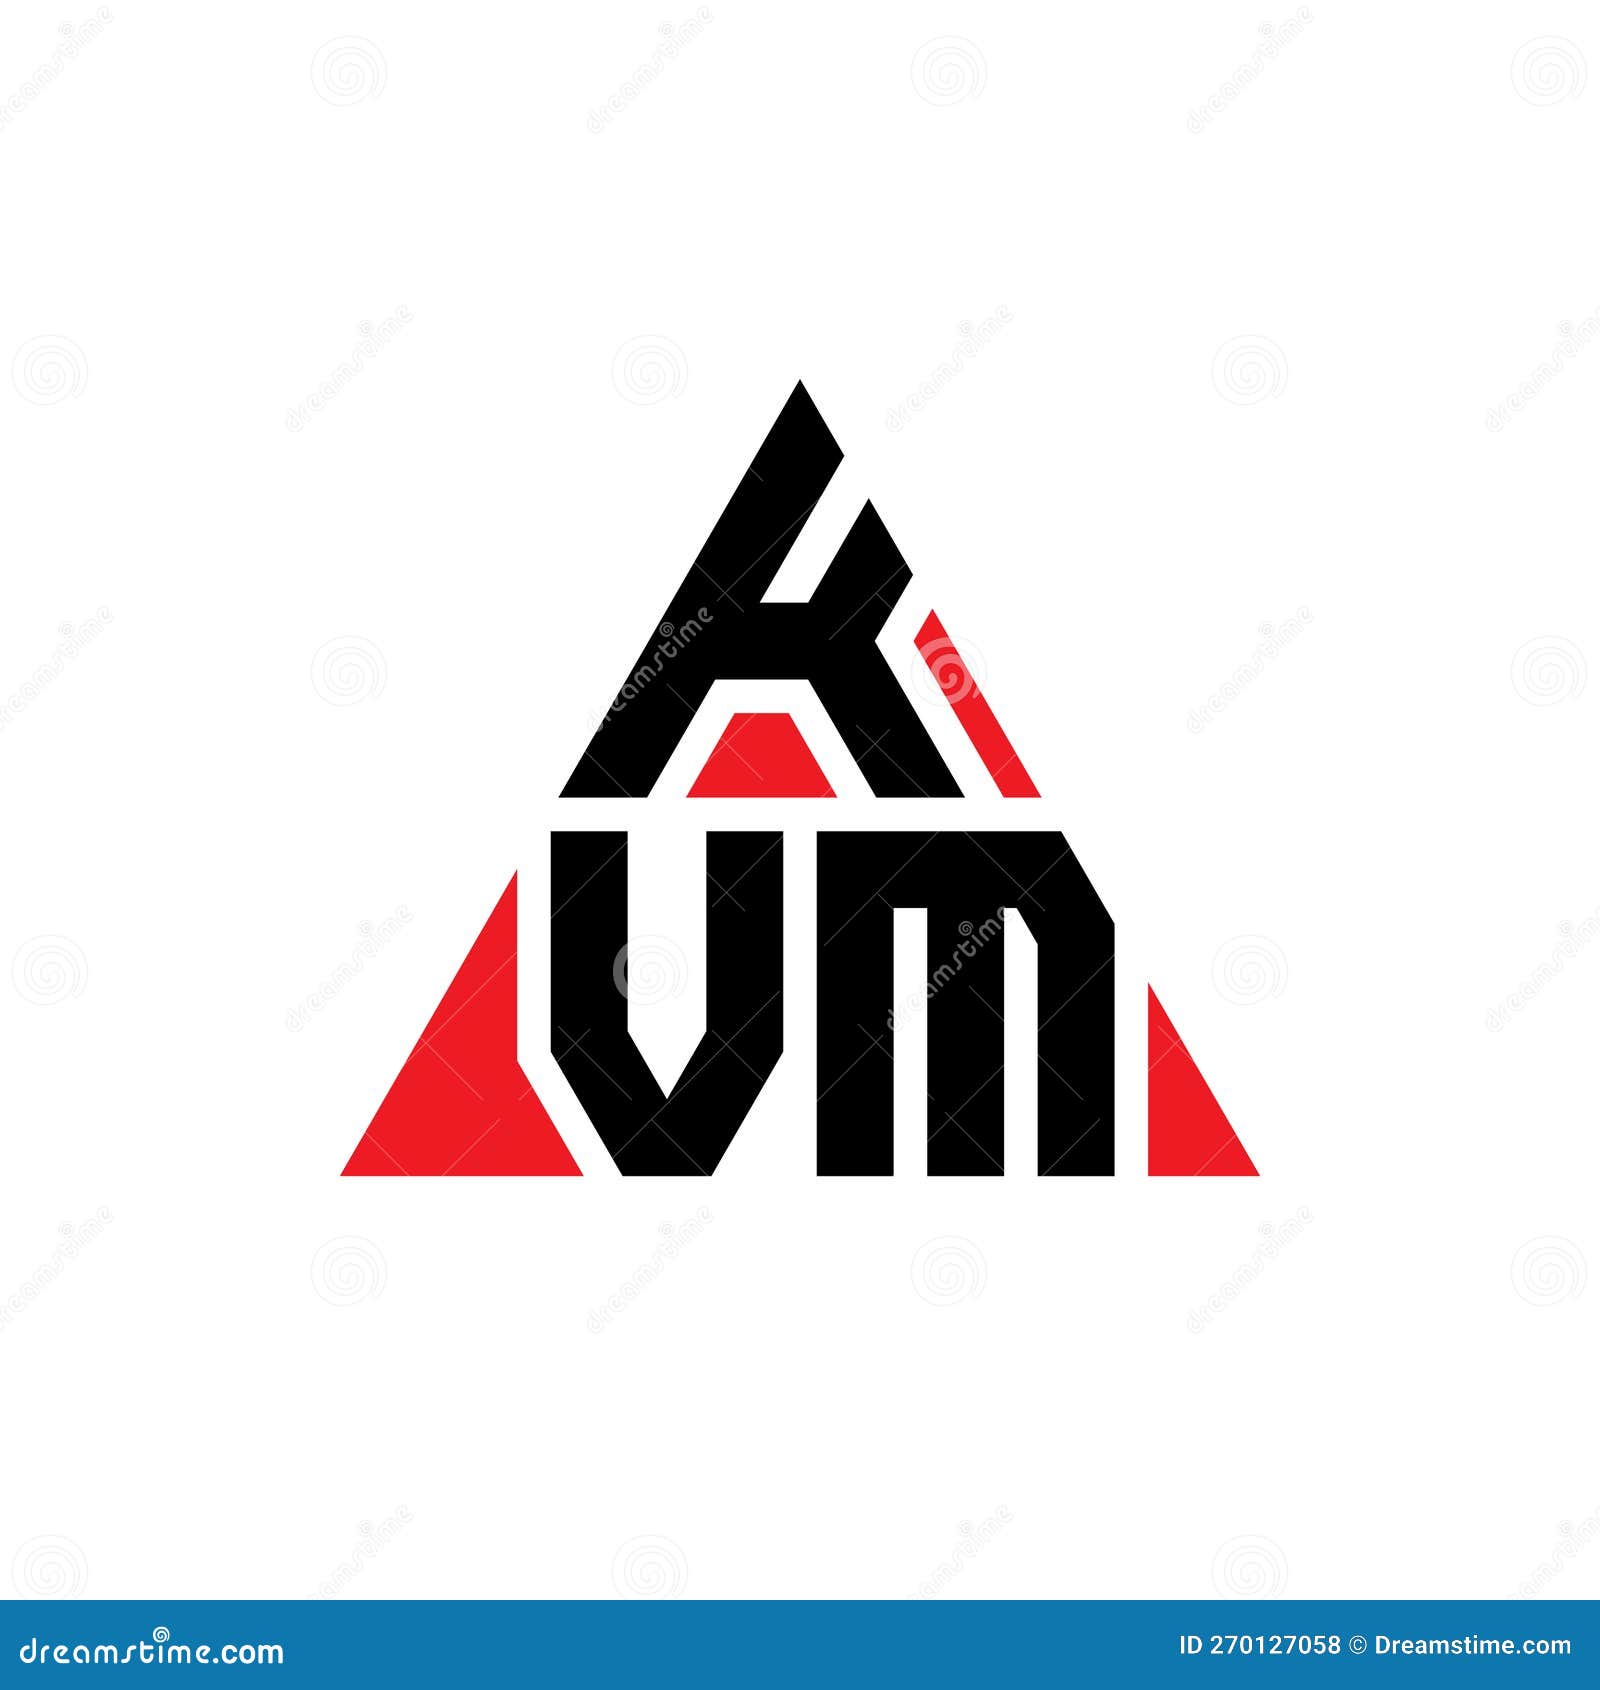 kvm triangle letter logo  with triangle . kvm triangle logo  monogram. kvm triangle  logo template with red